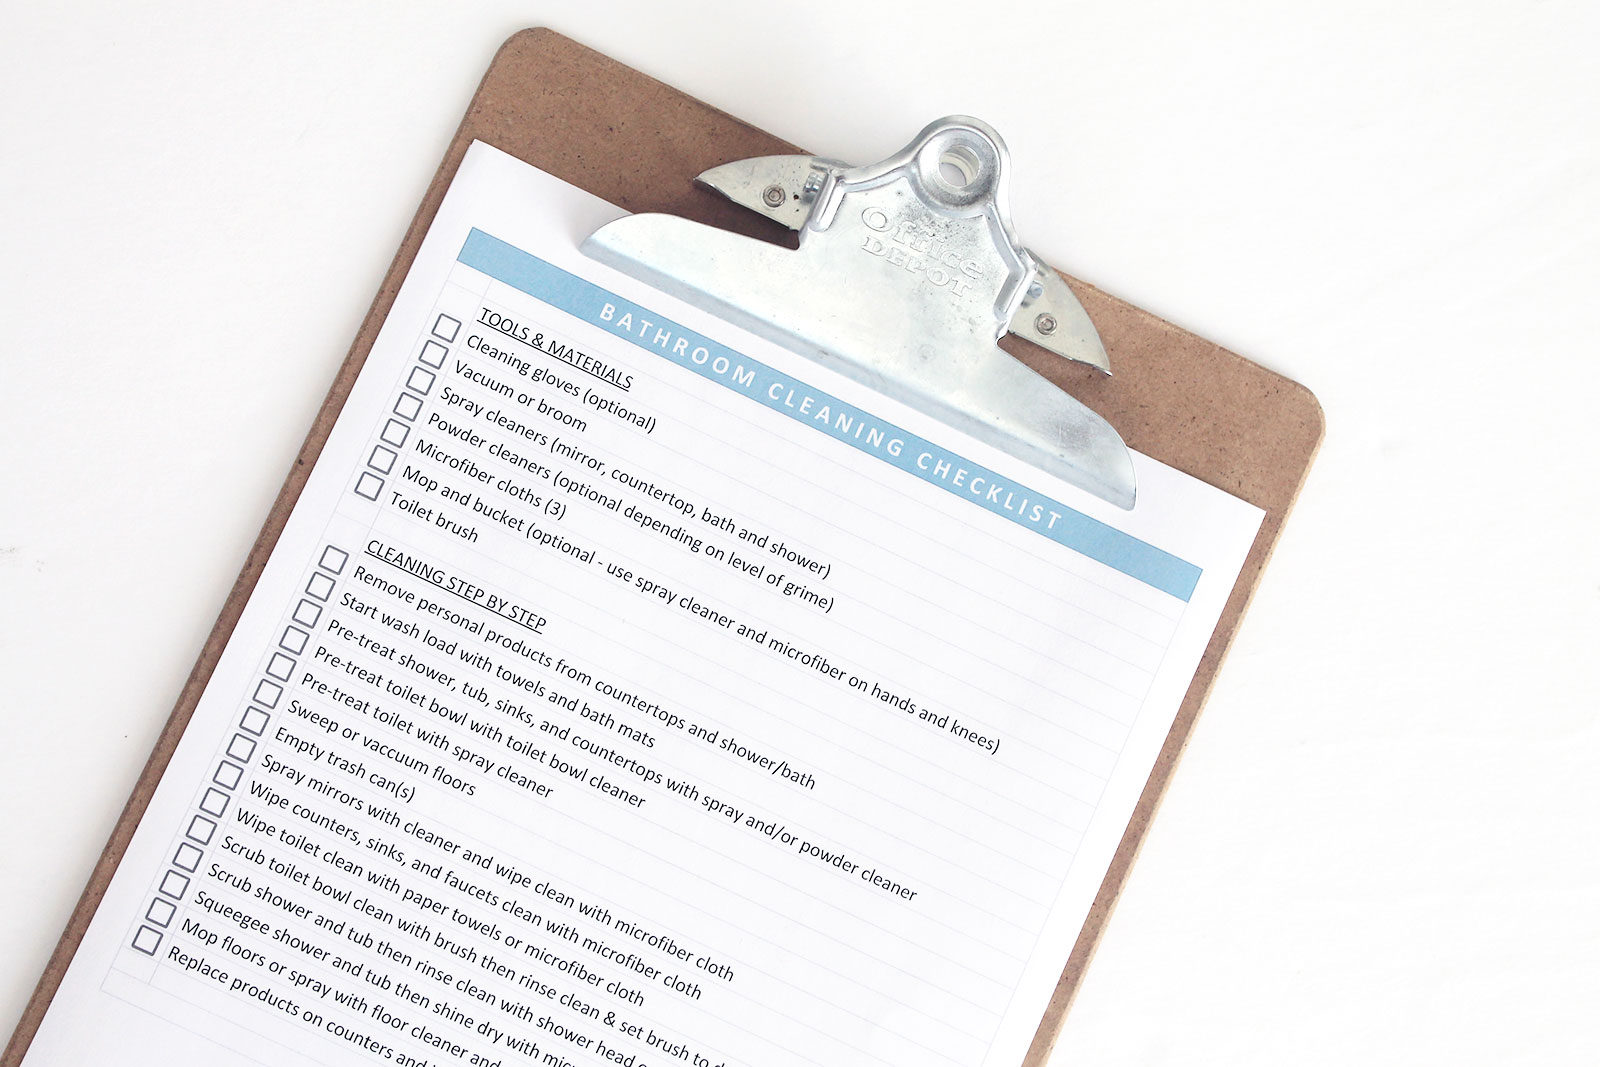 Bathroom Cleaning Checklist - save time cleaning the bathroom with step by step bathroom cleaning instructions and free checklist download.